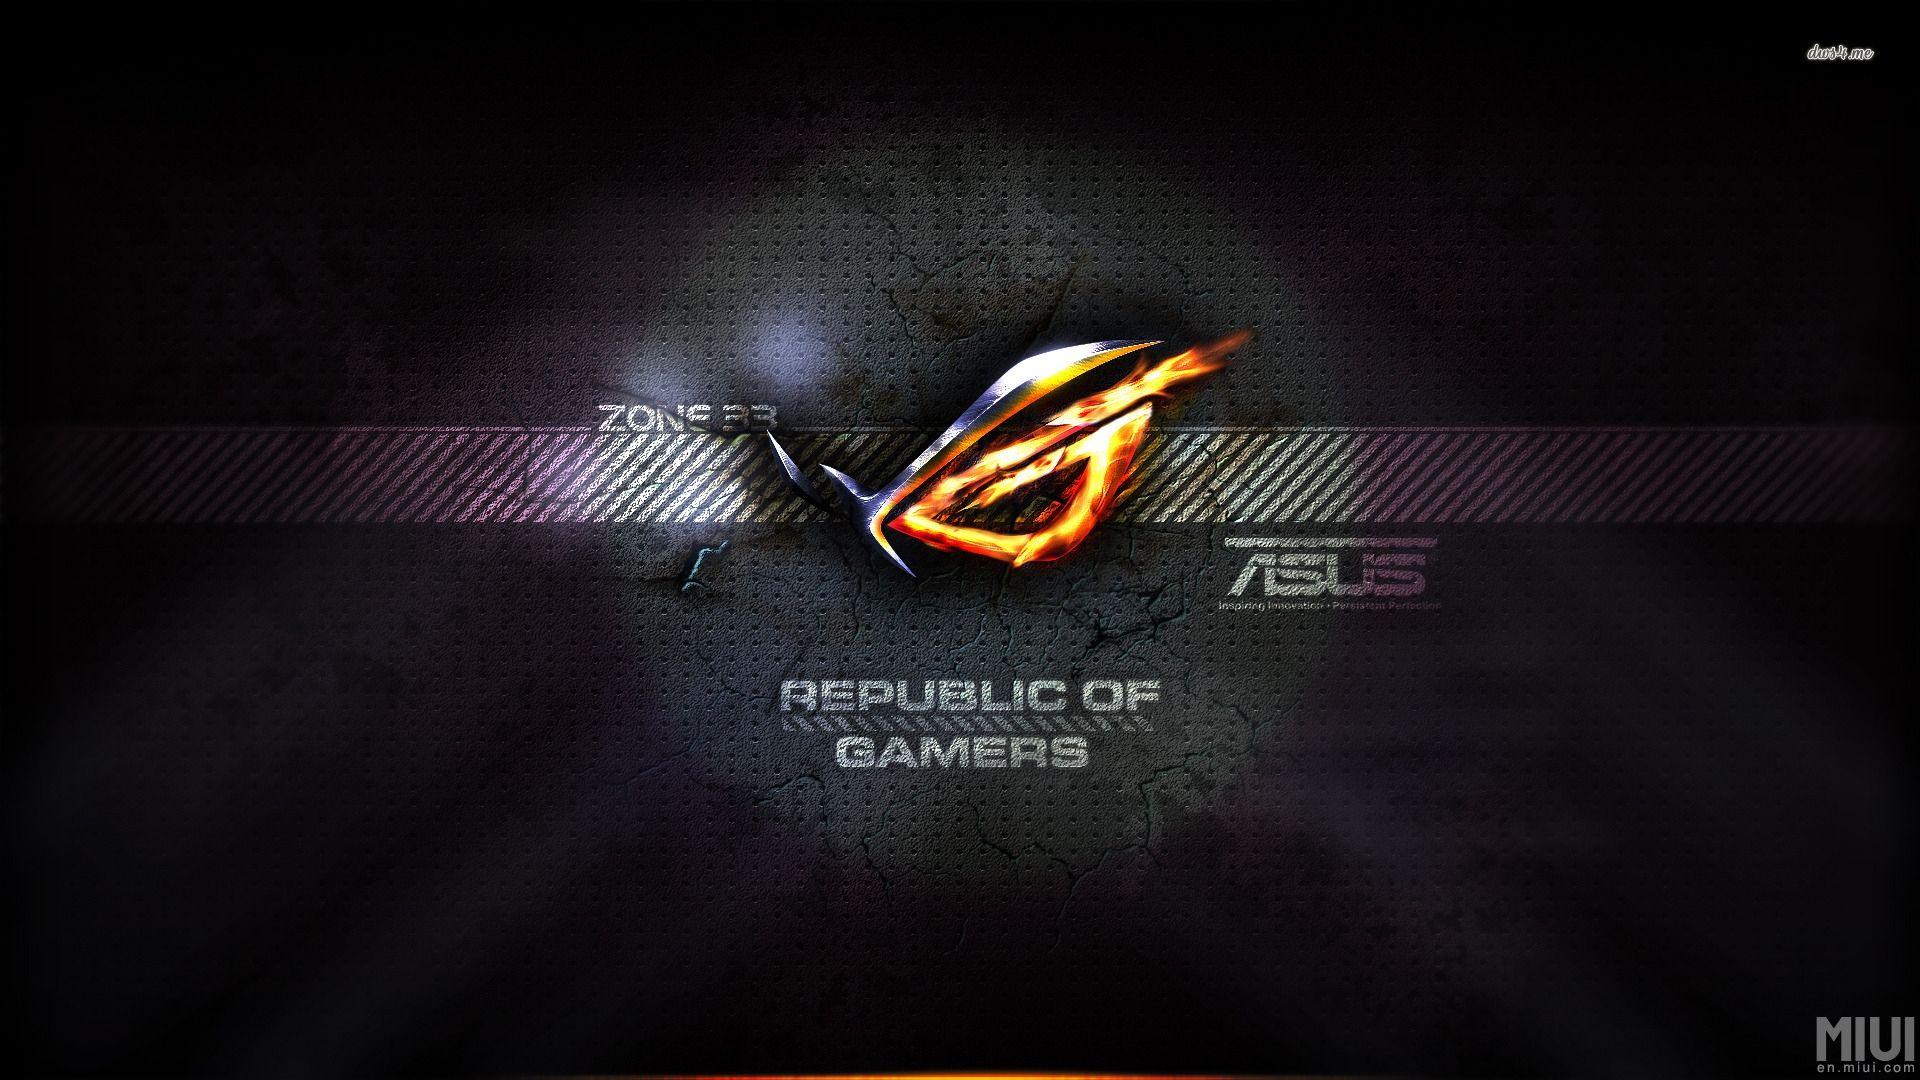 ASUS Republic Of Gamers Wallpaper By Viral316